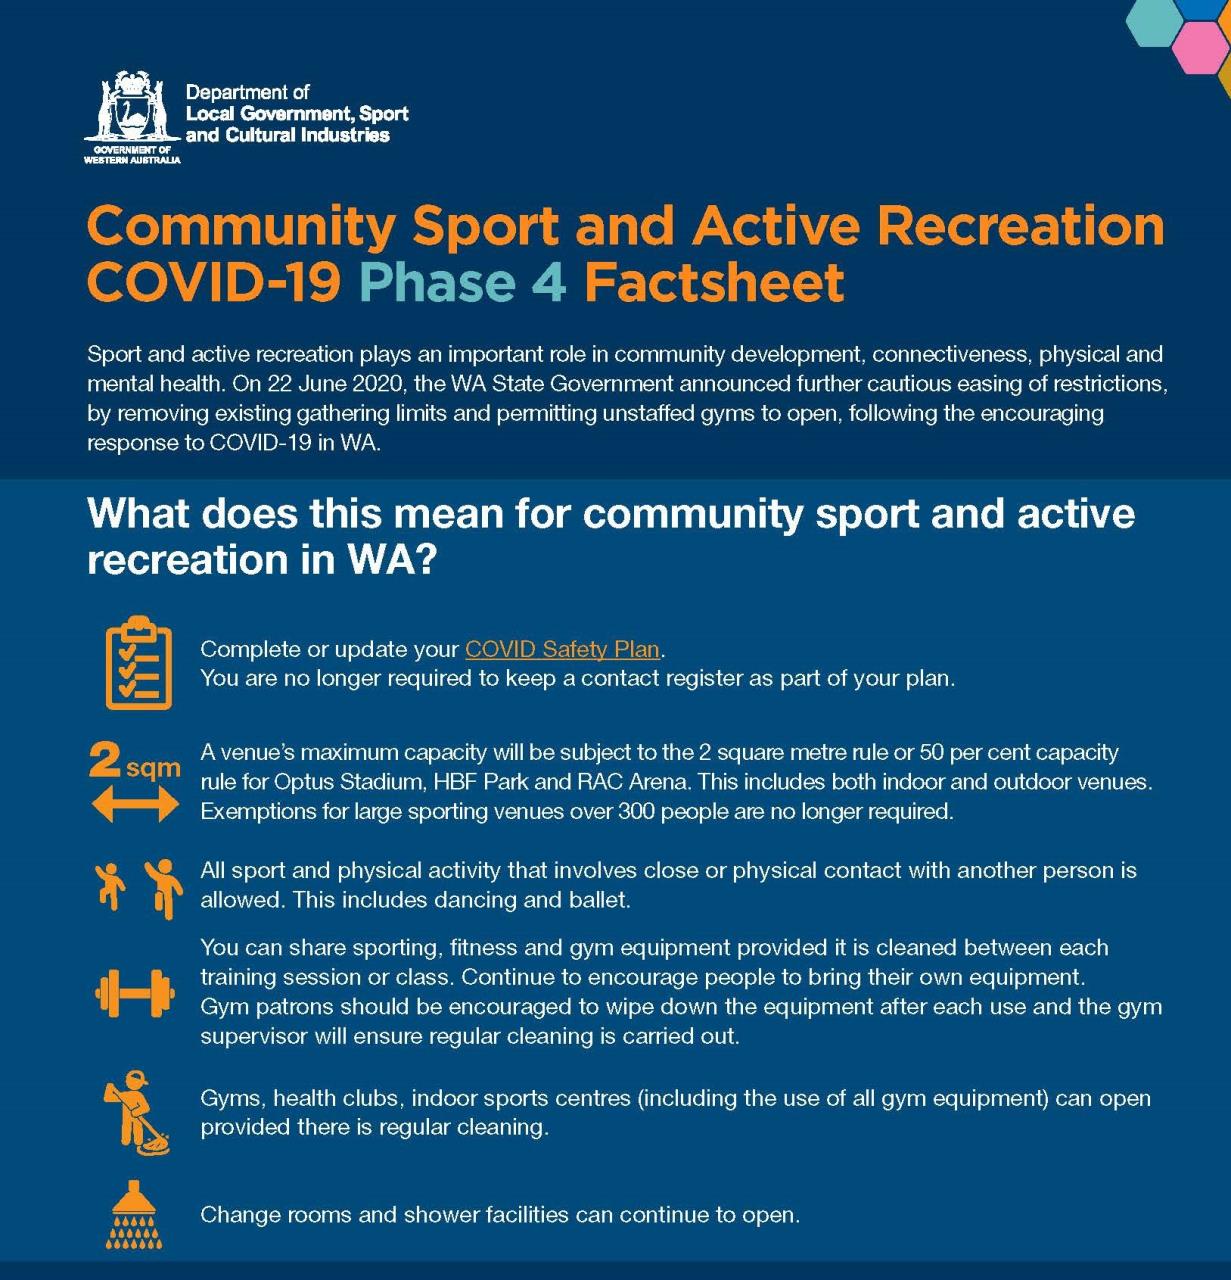 Community Sport & Recreation Phase 4 COVID Facts